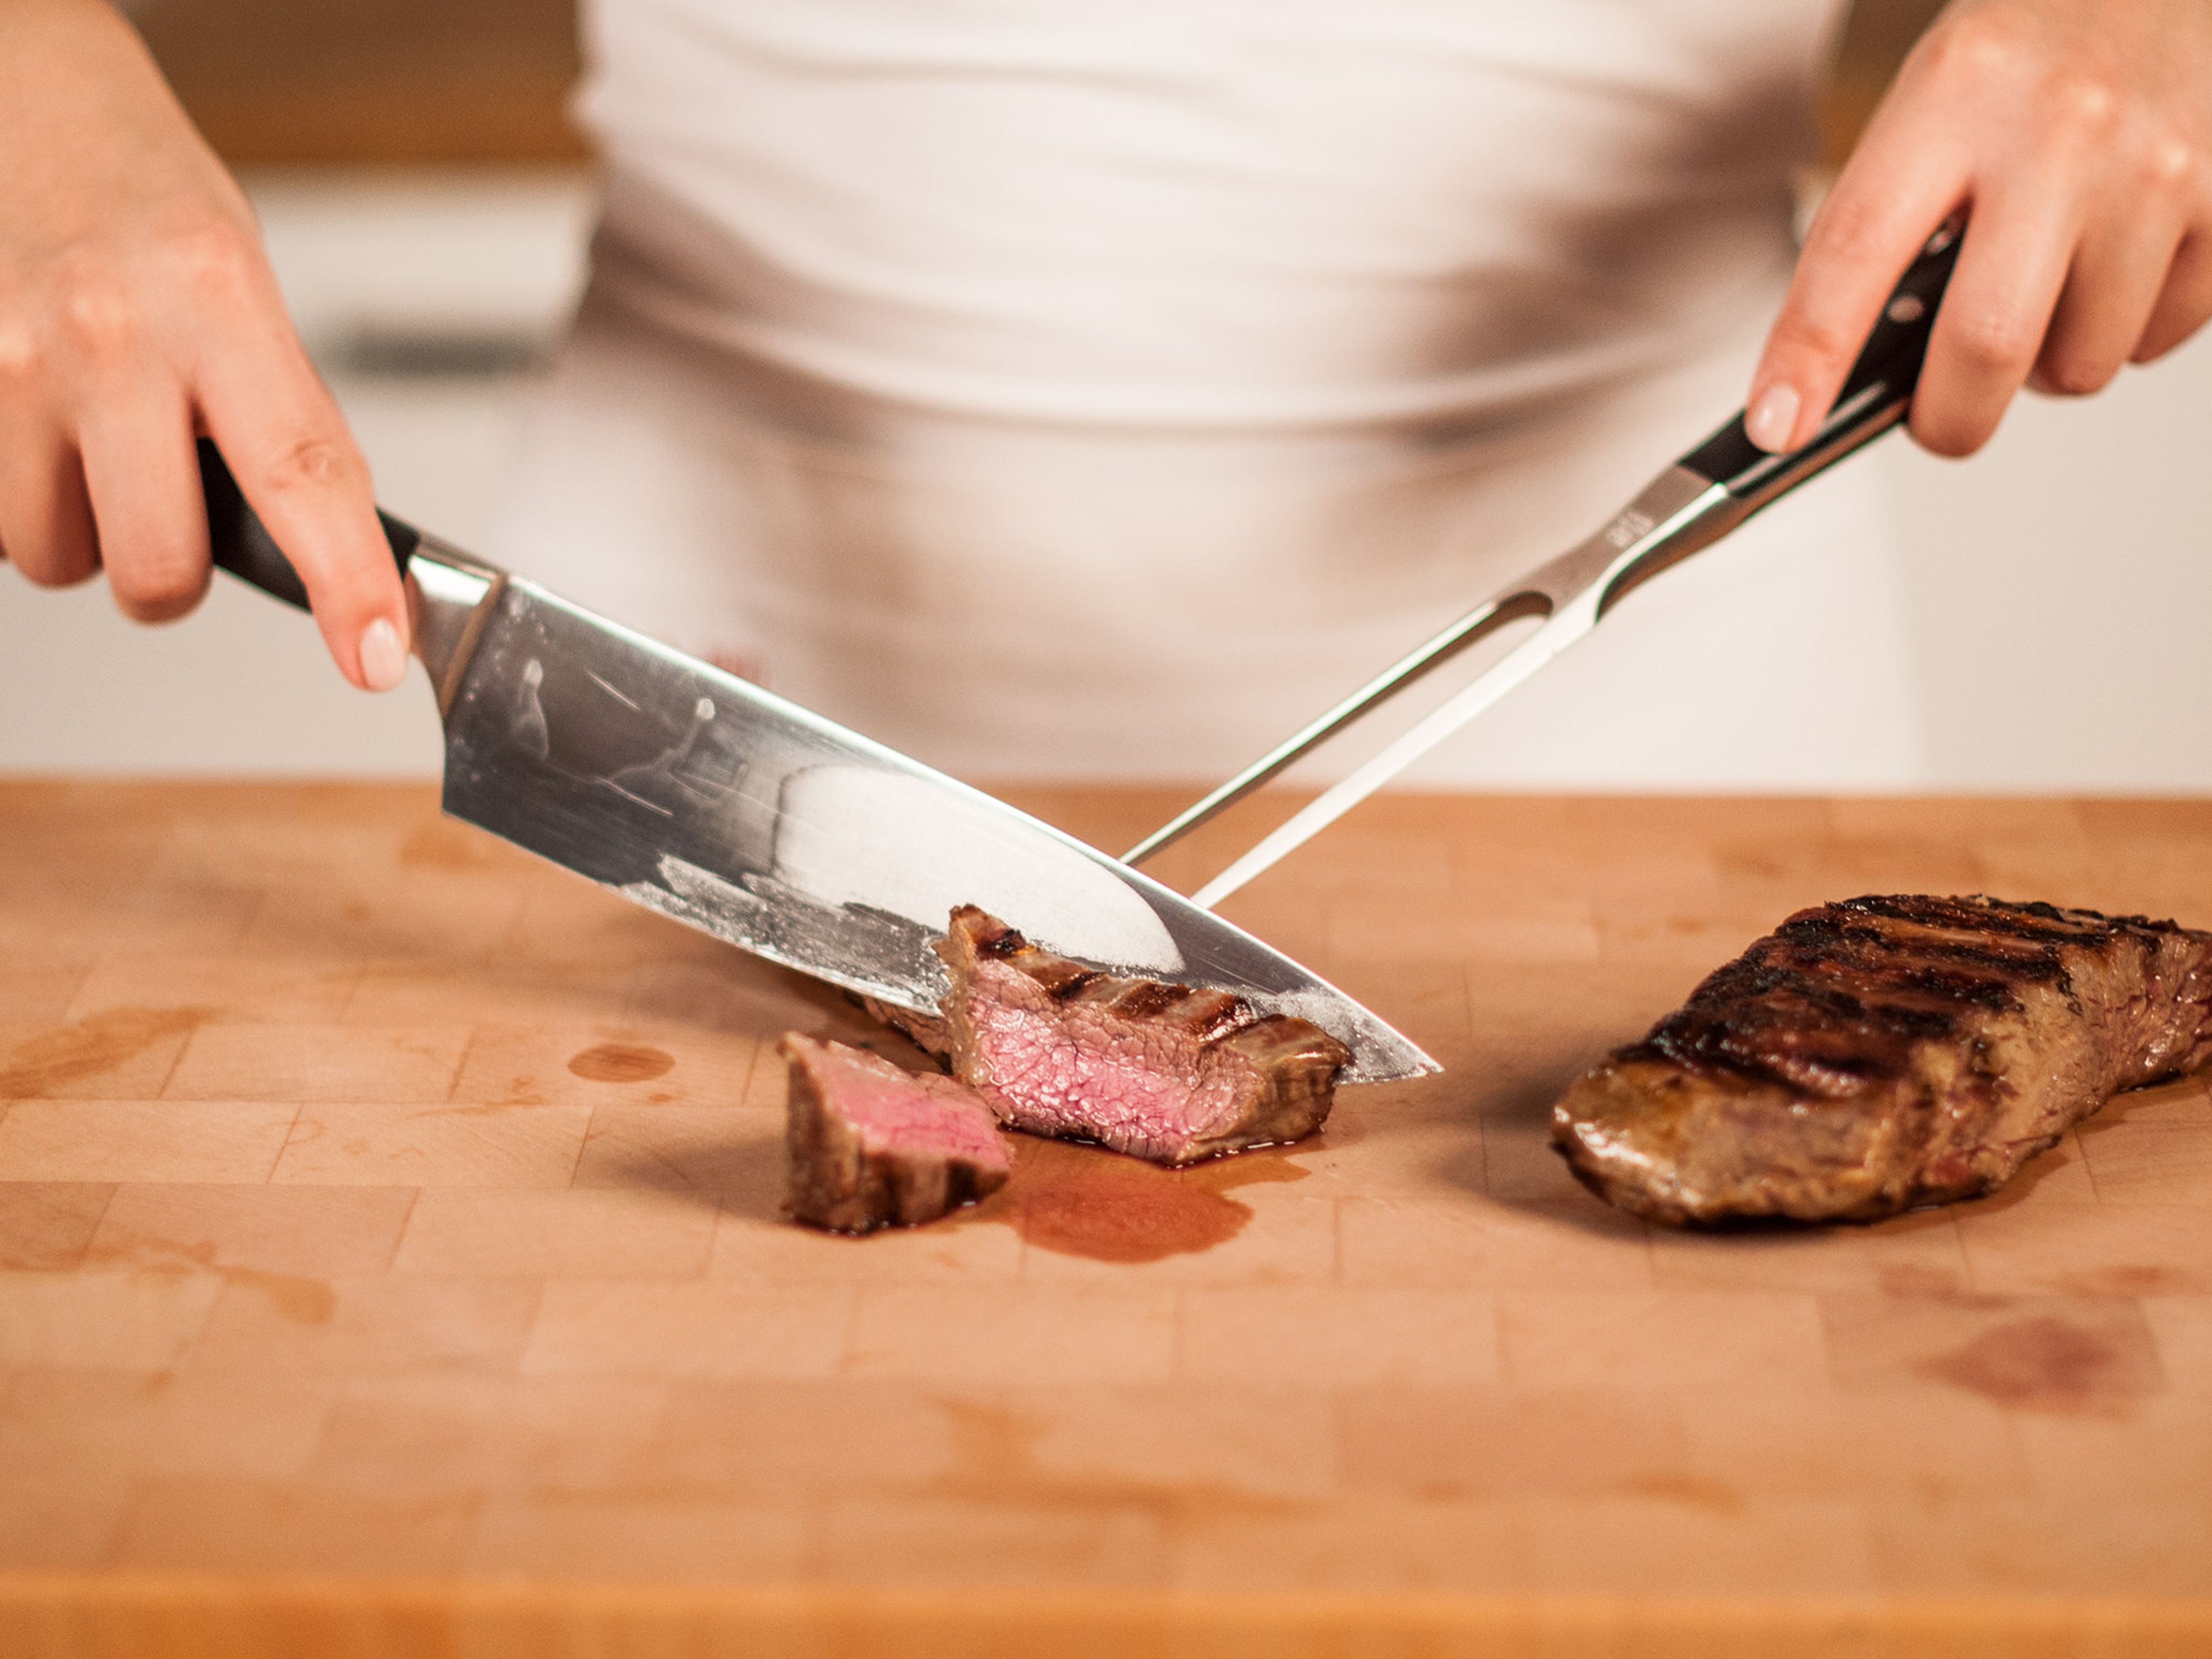 Serve by slicing the steaks into thin slices, always cutting the steaks against the grain of the meat for maximum tenderness.